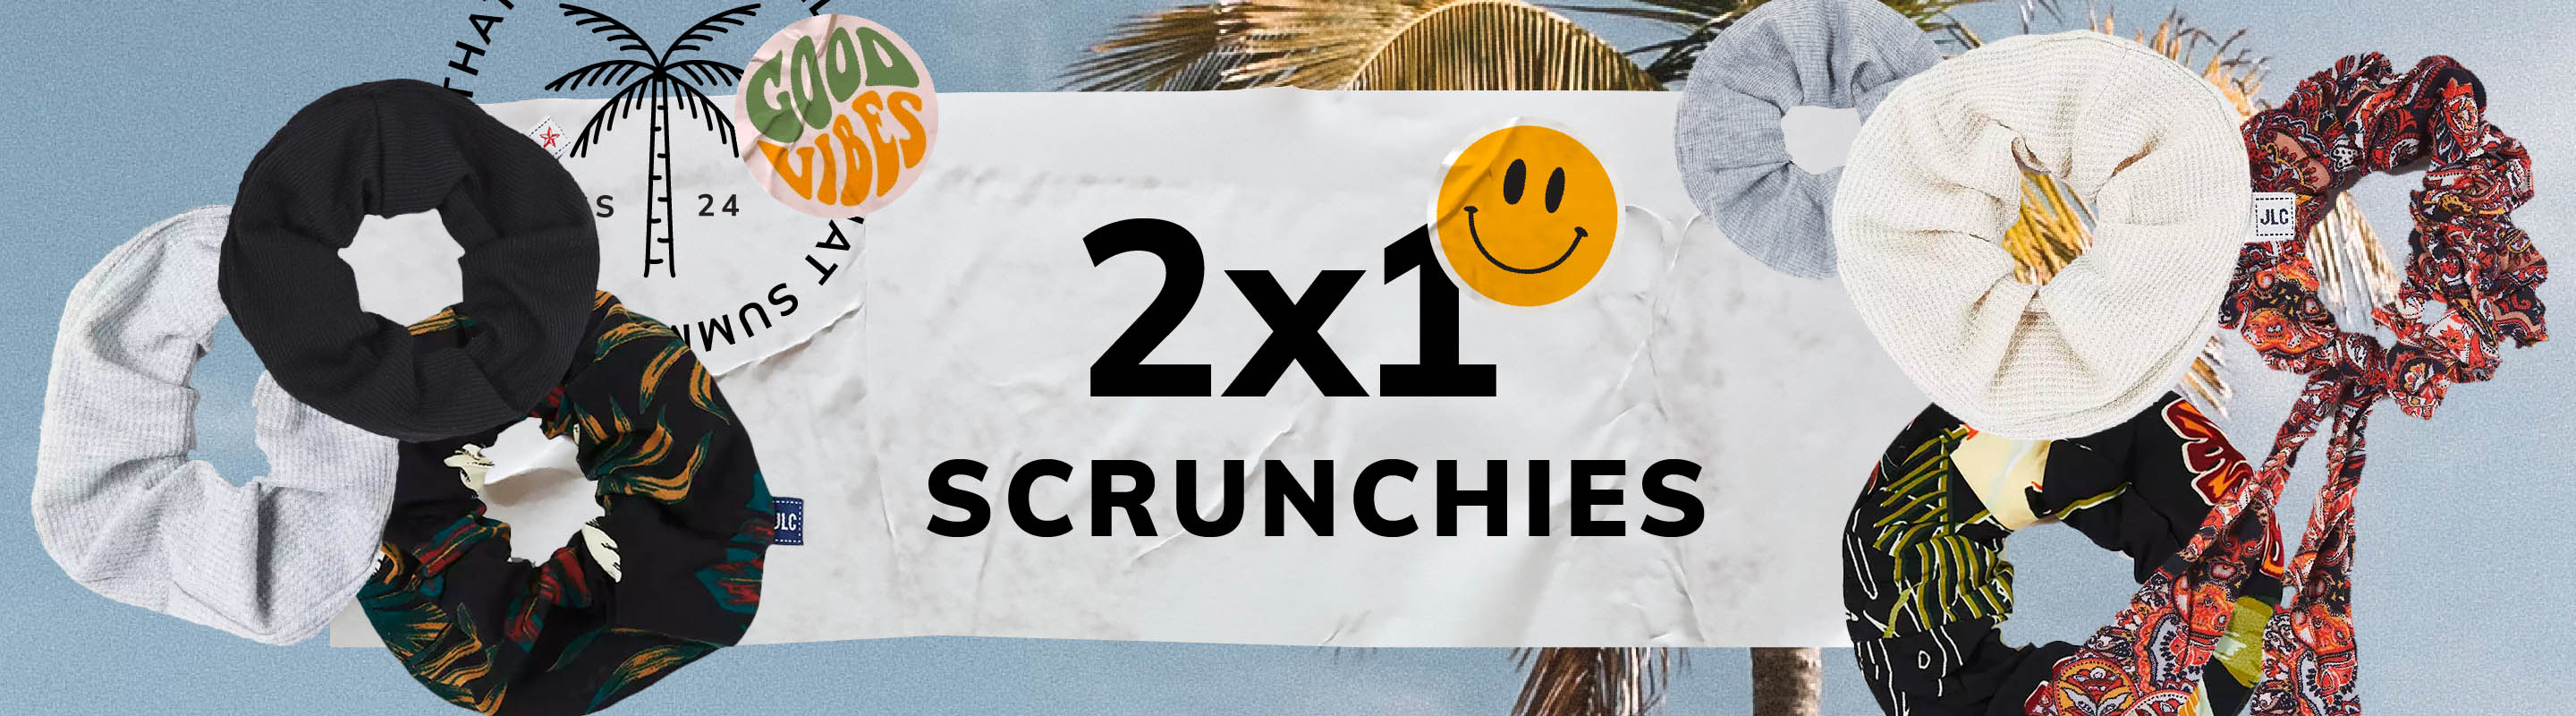 2x1 scrunchies banner to